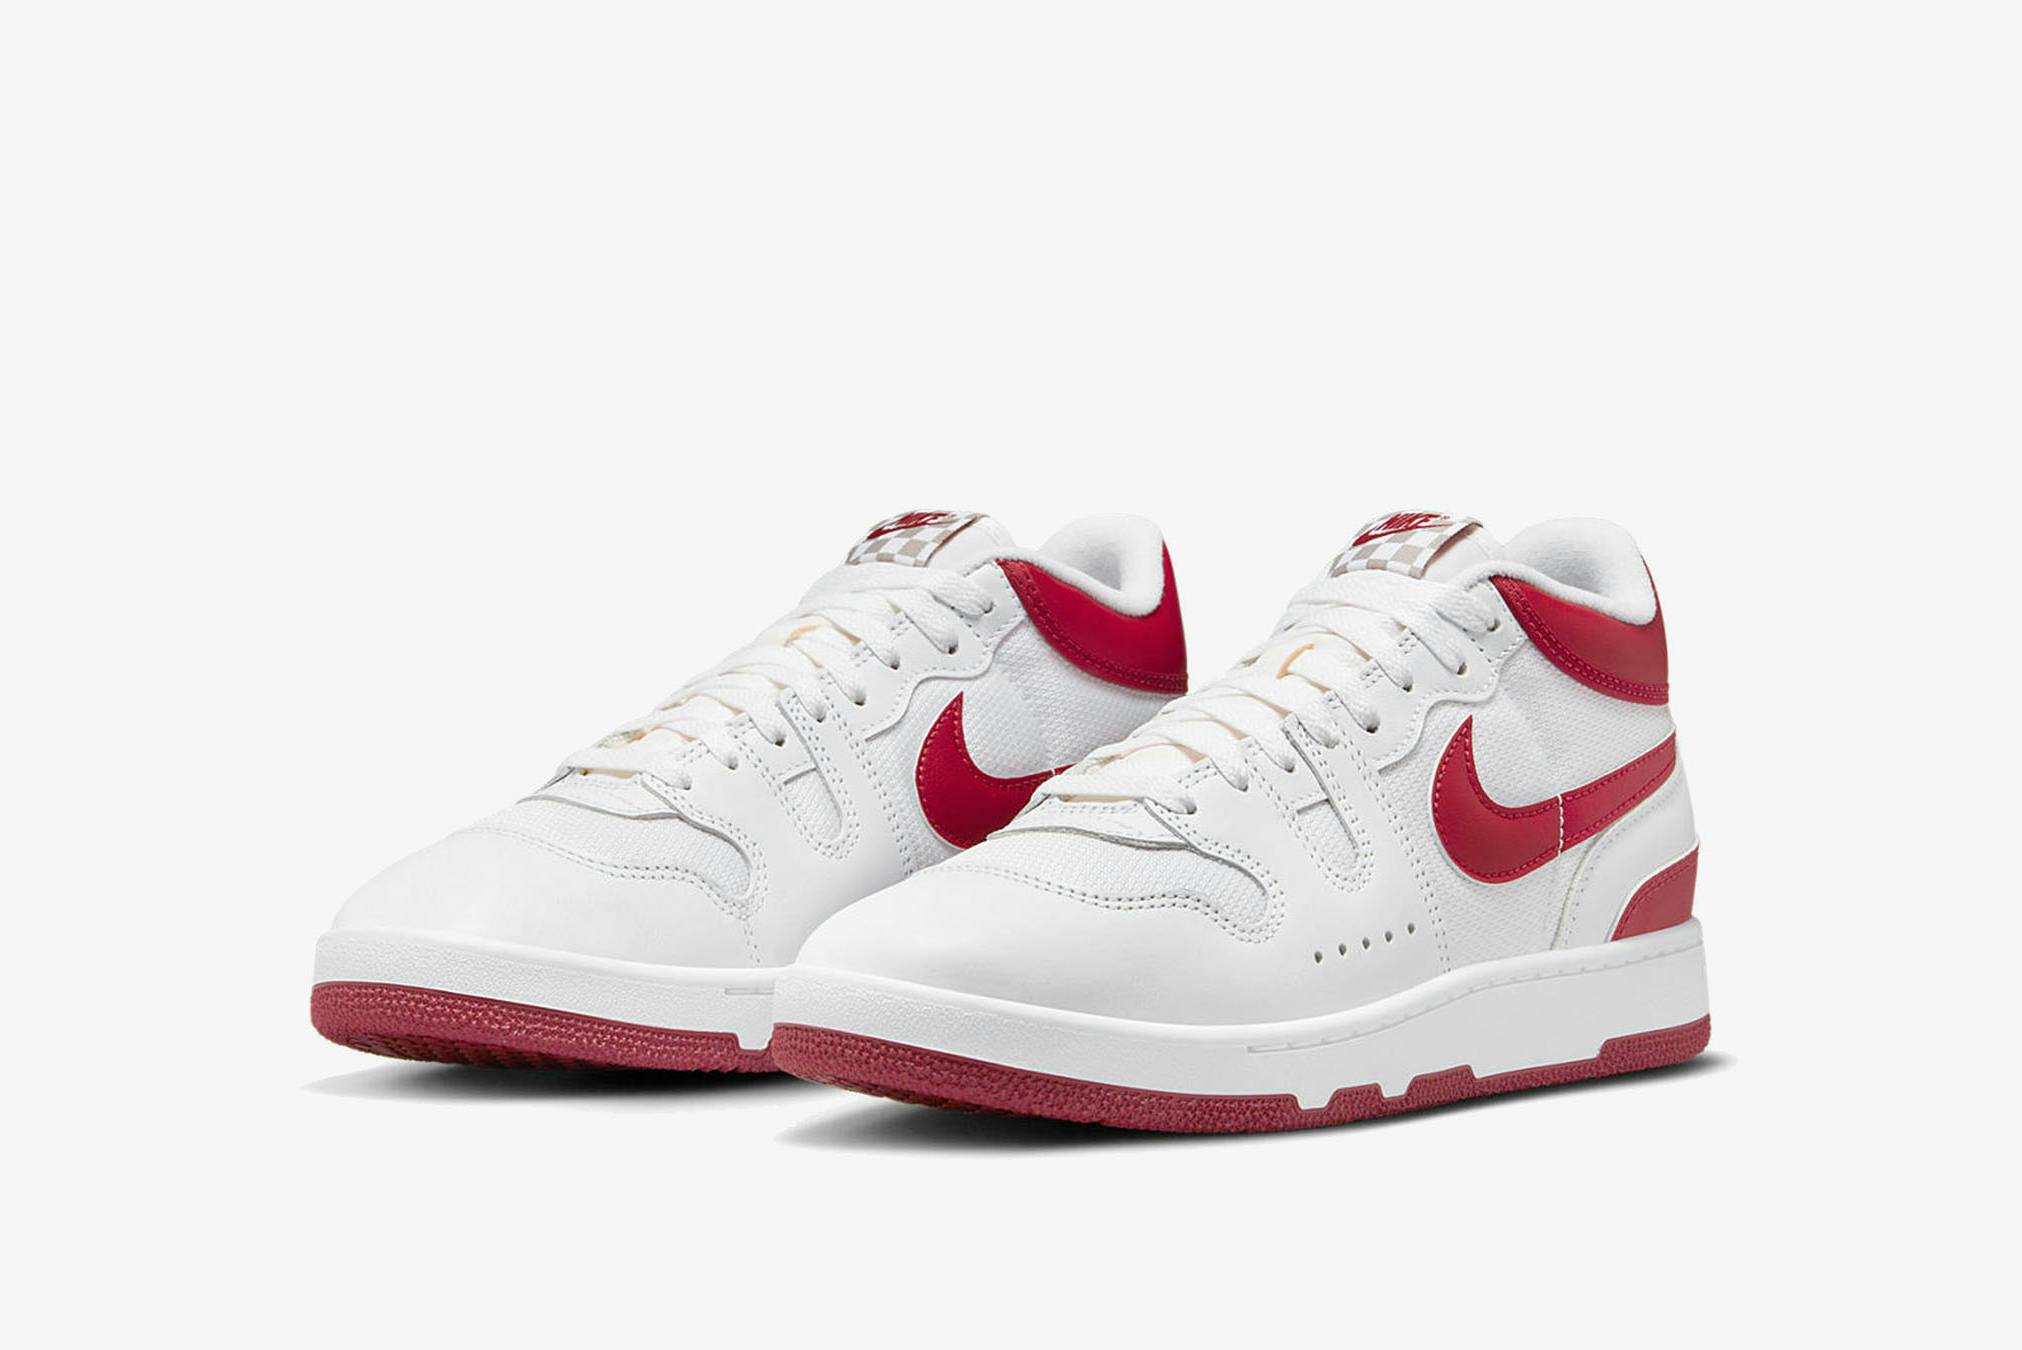 NIKE ATTACK “RED CRUSH” – REGISTER NOW | END.